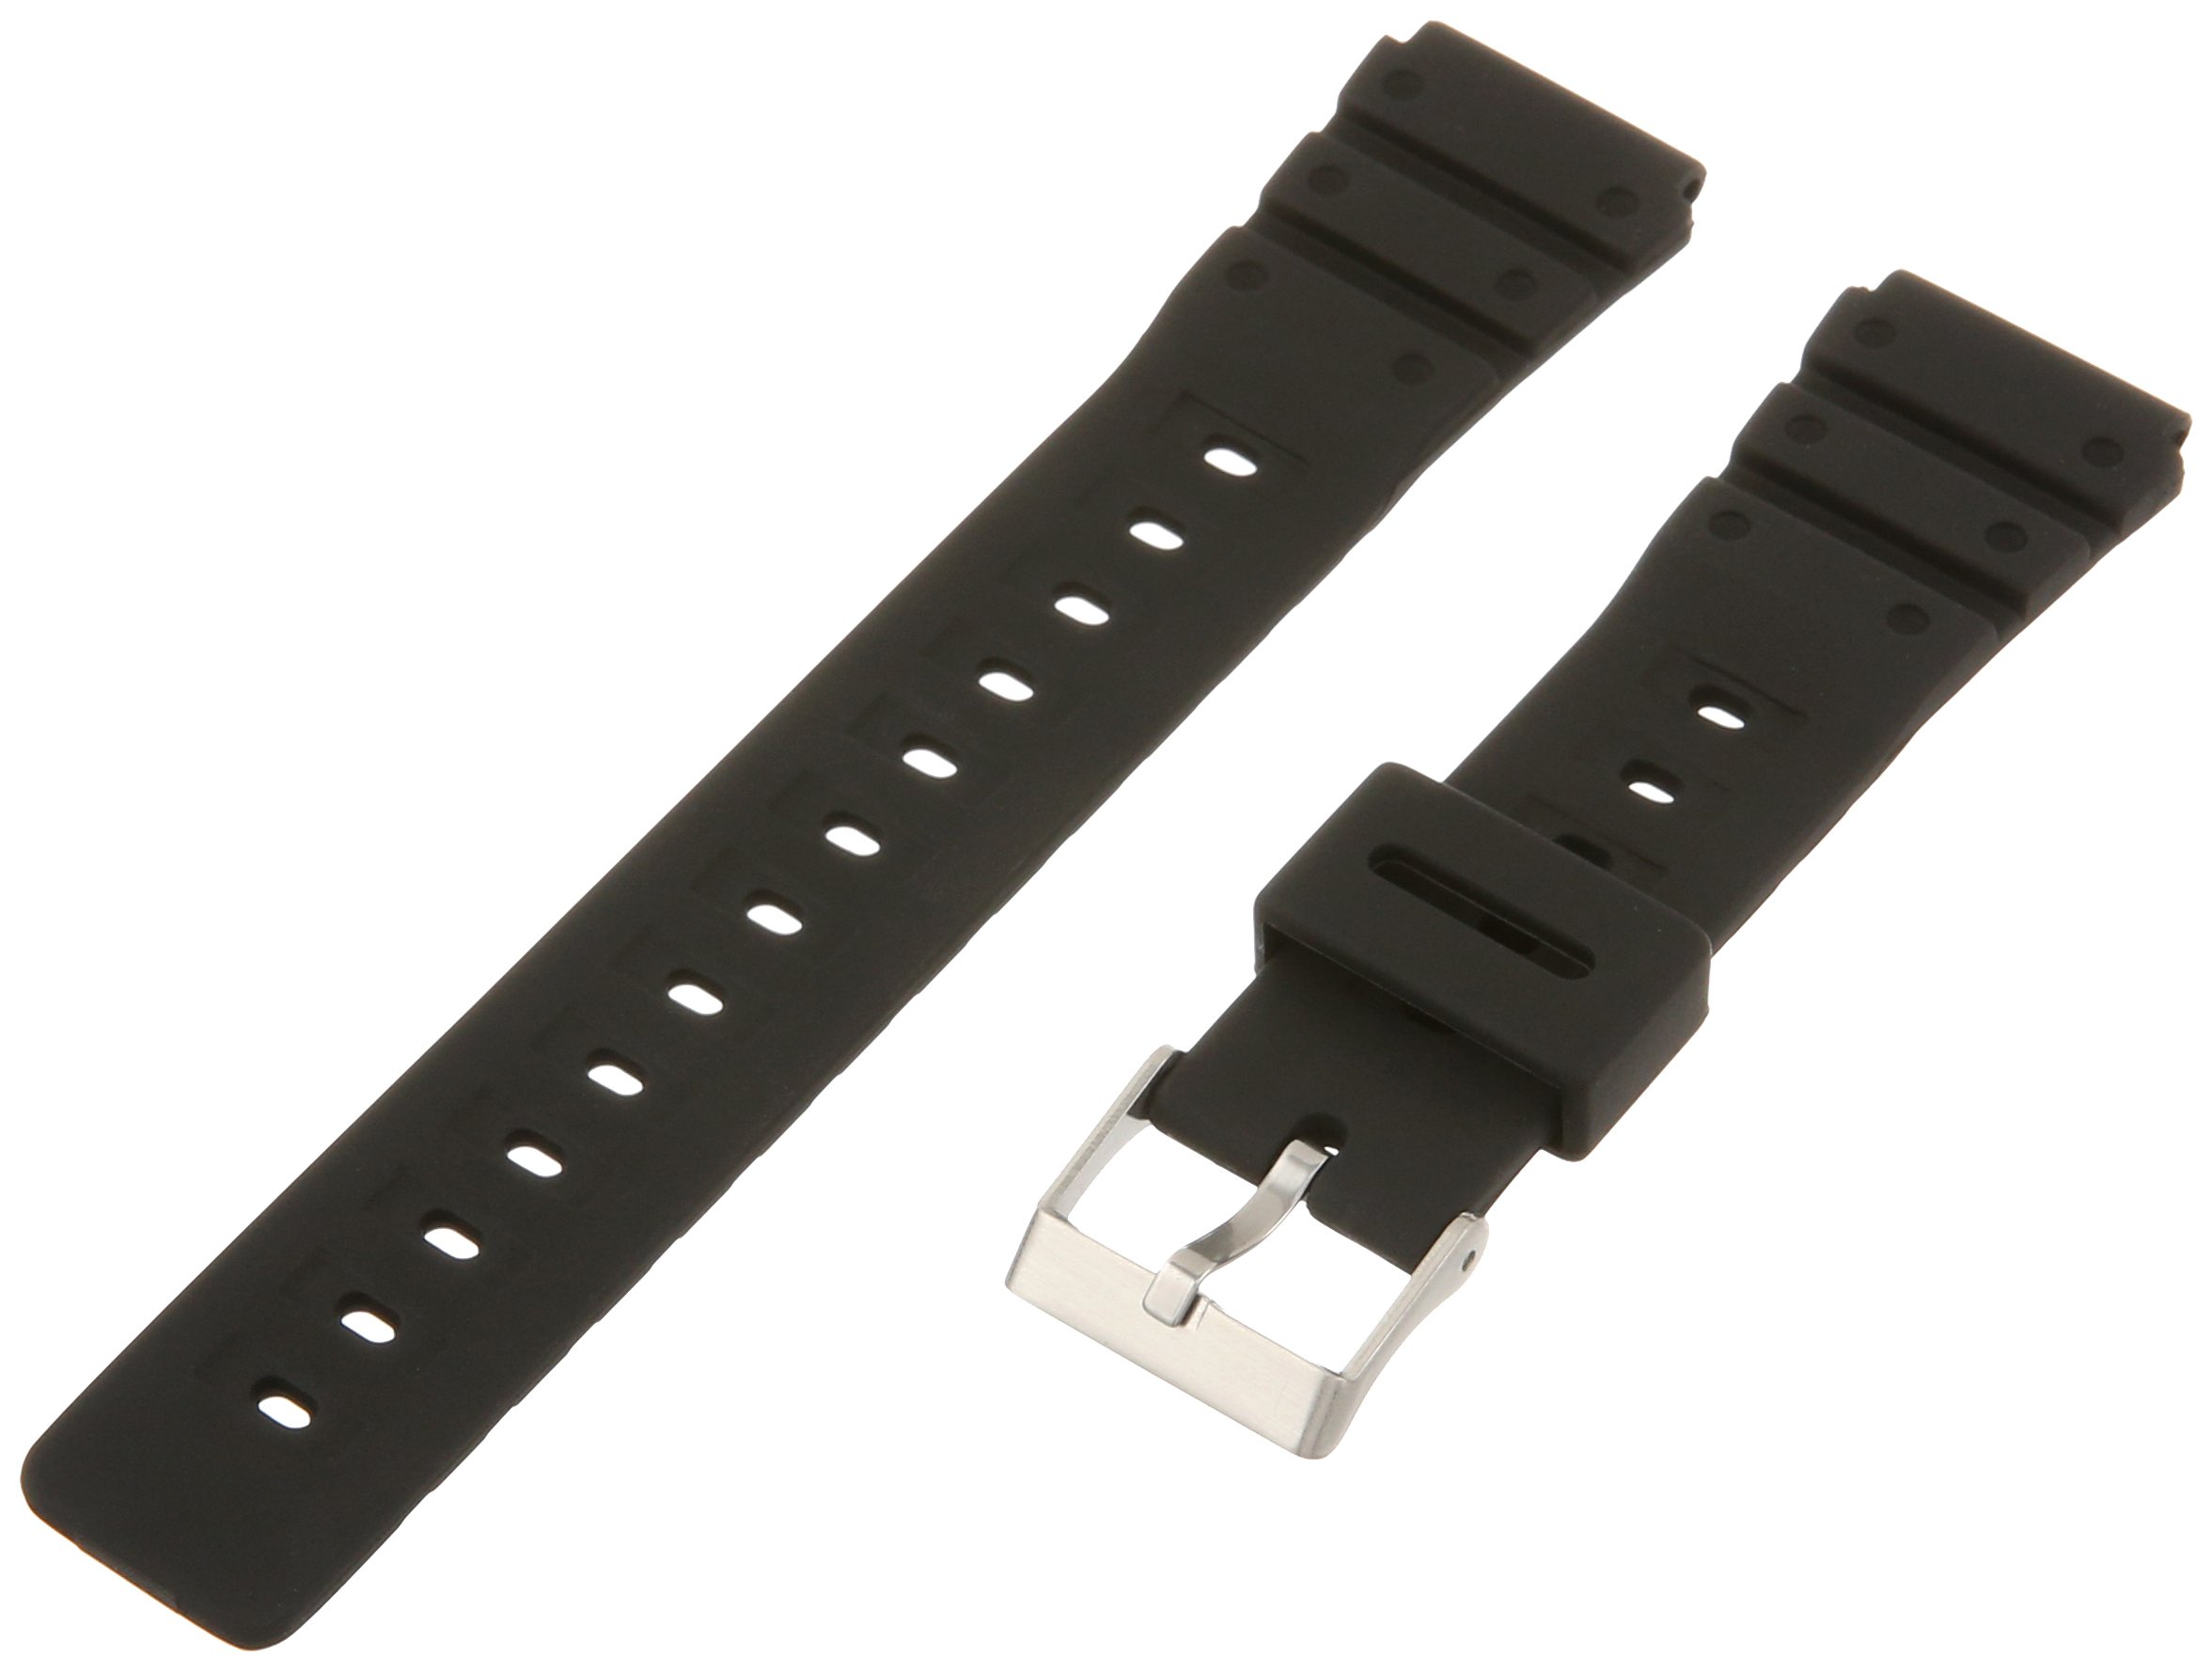 Timex Men's Resin Performance Sport Black Replacement Watchband